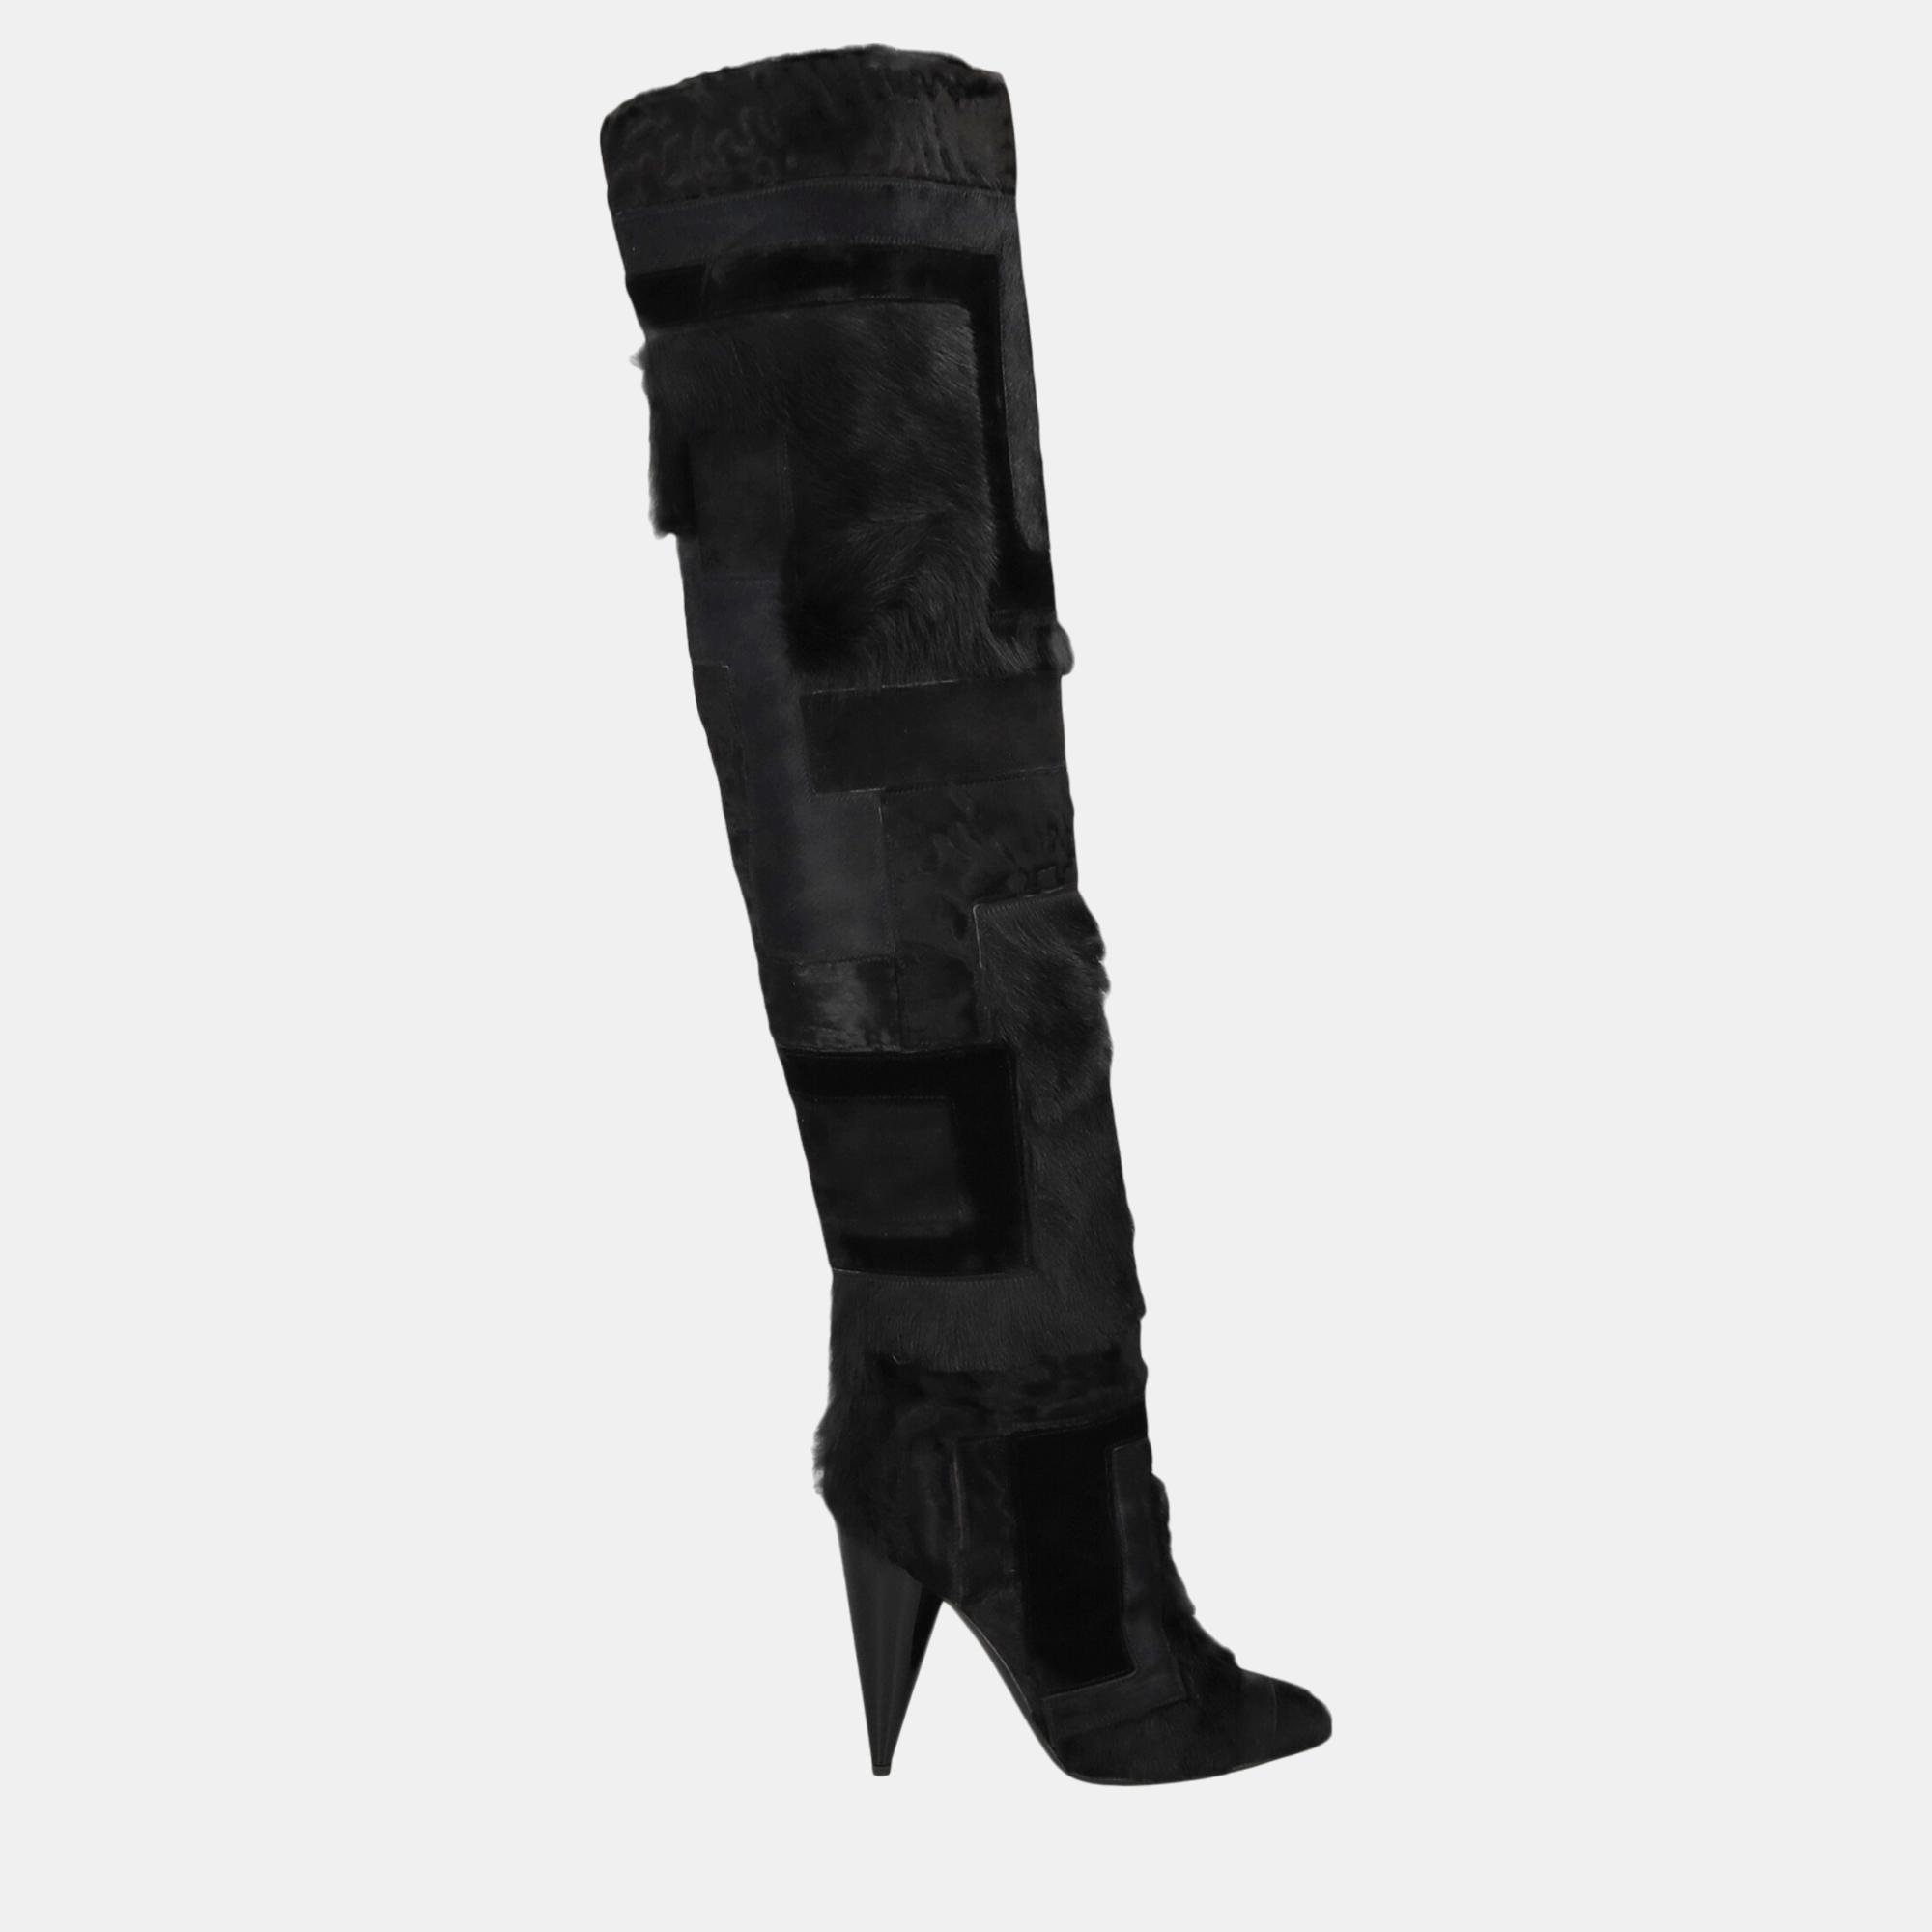 Tom Ford  Women's Leather Boots - Black - EU 39